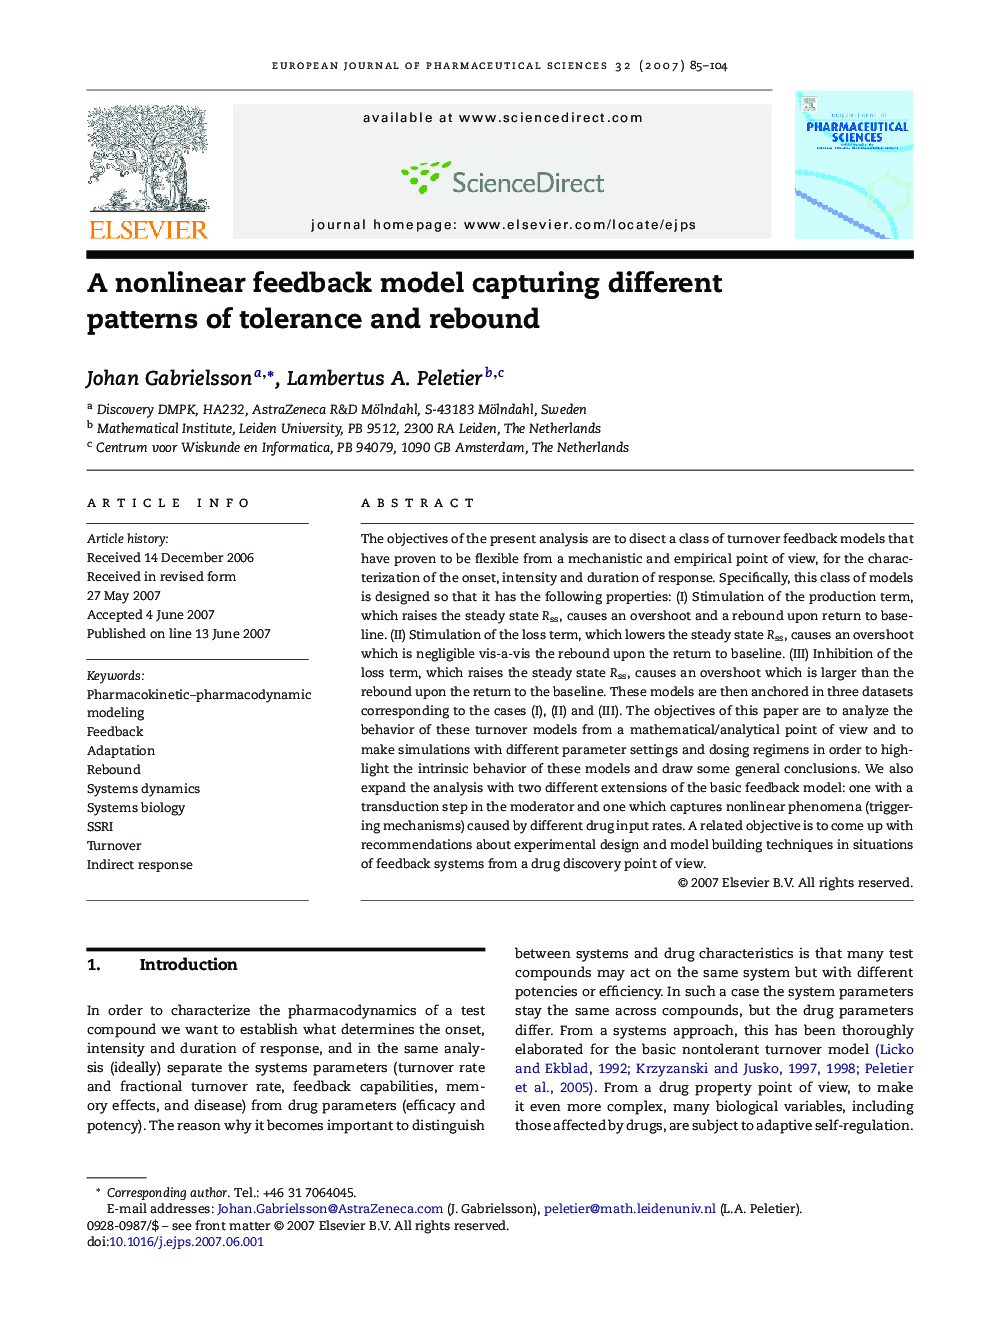 A nonlinear feedback model capturing different patterns of tolerance and rebound